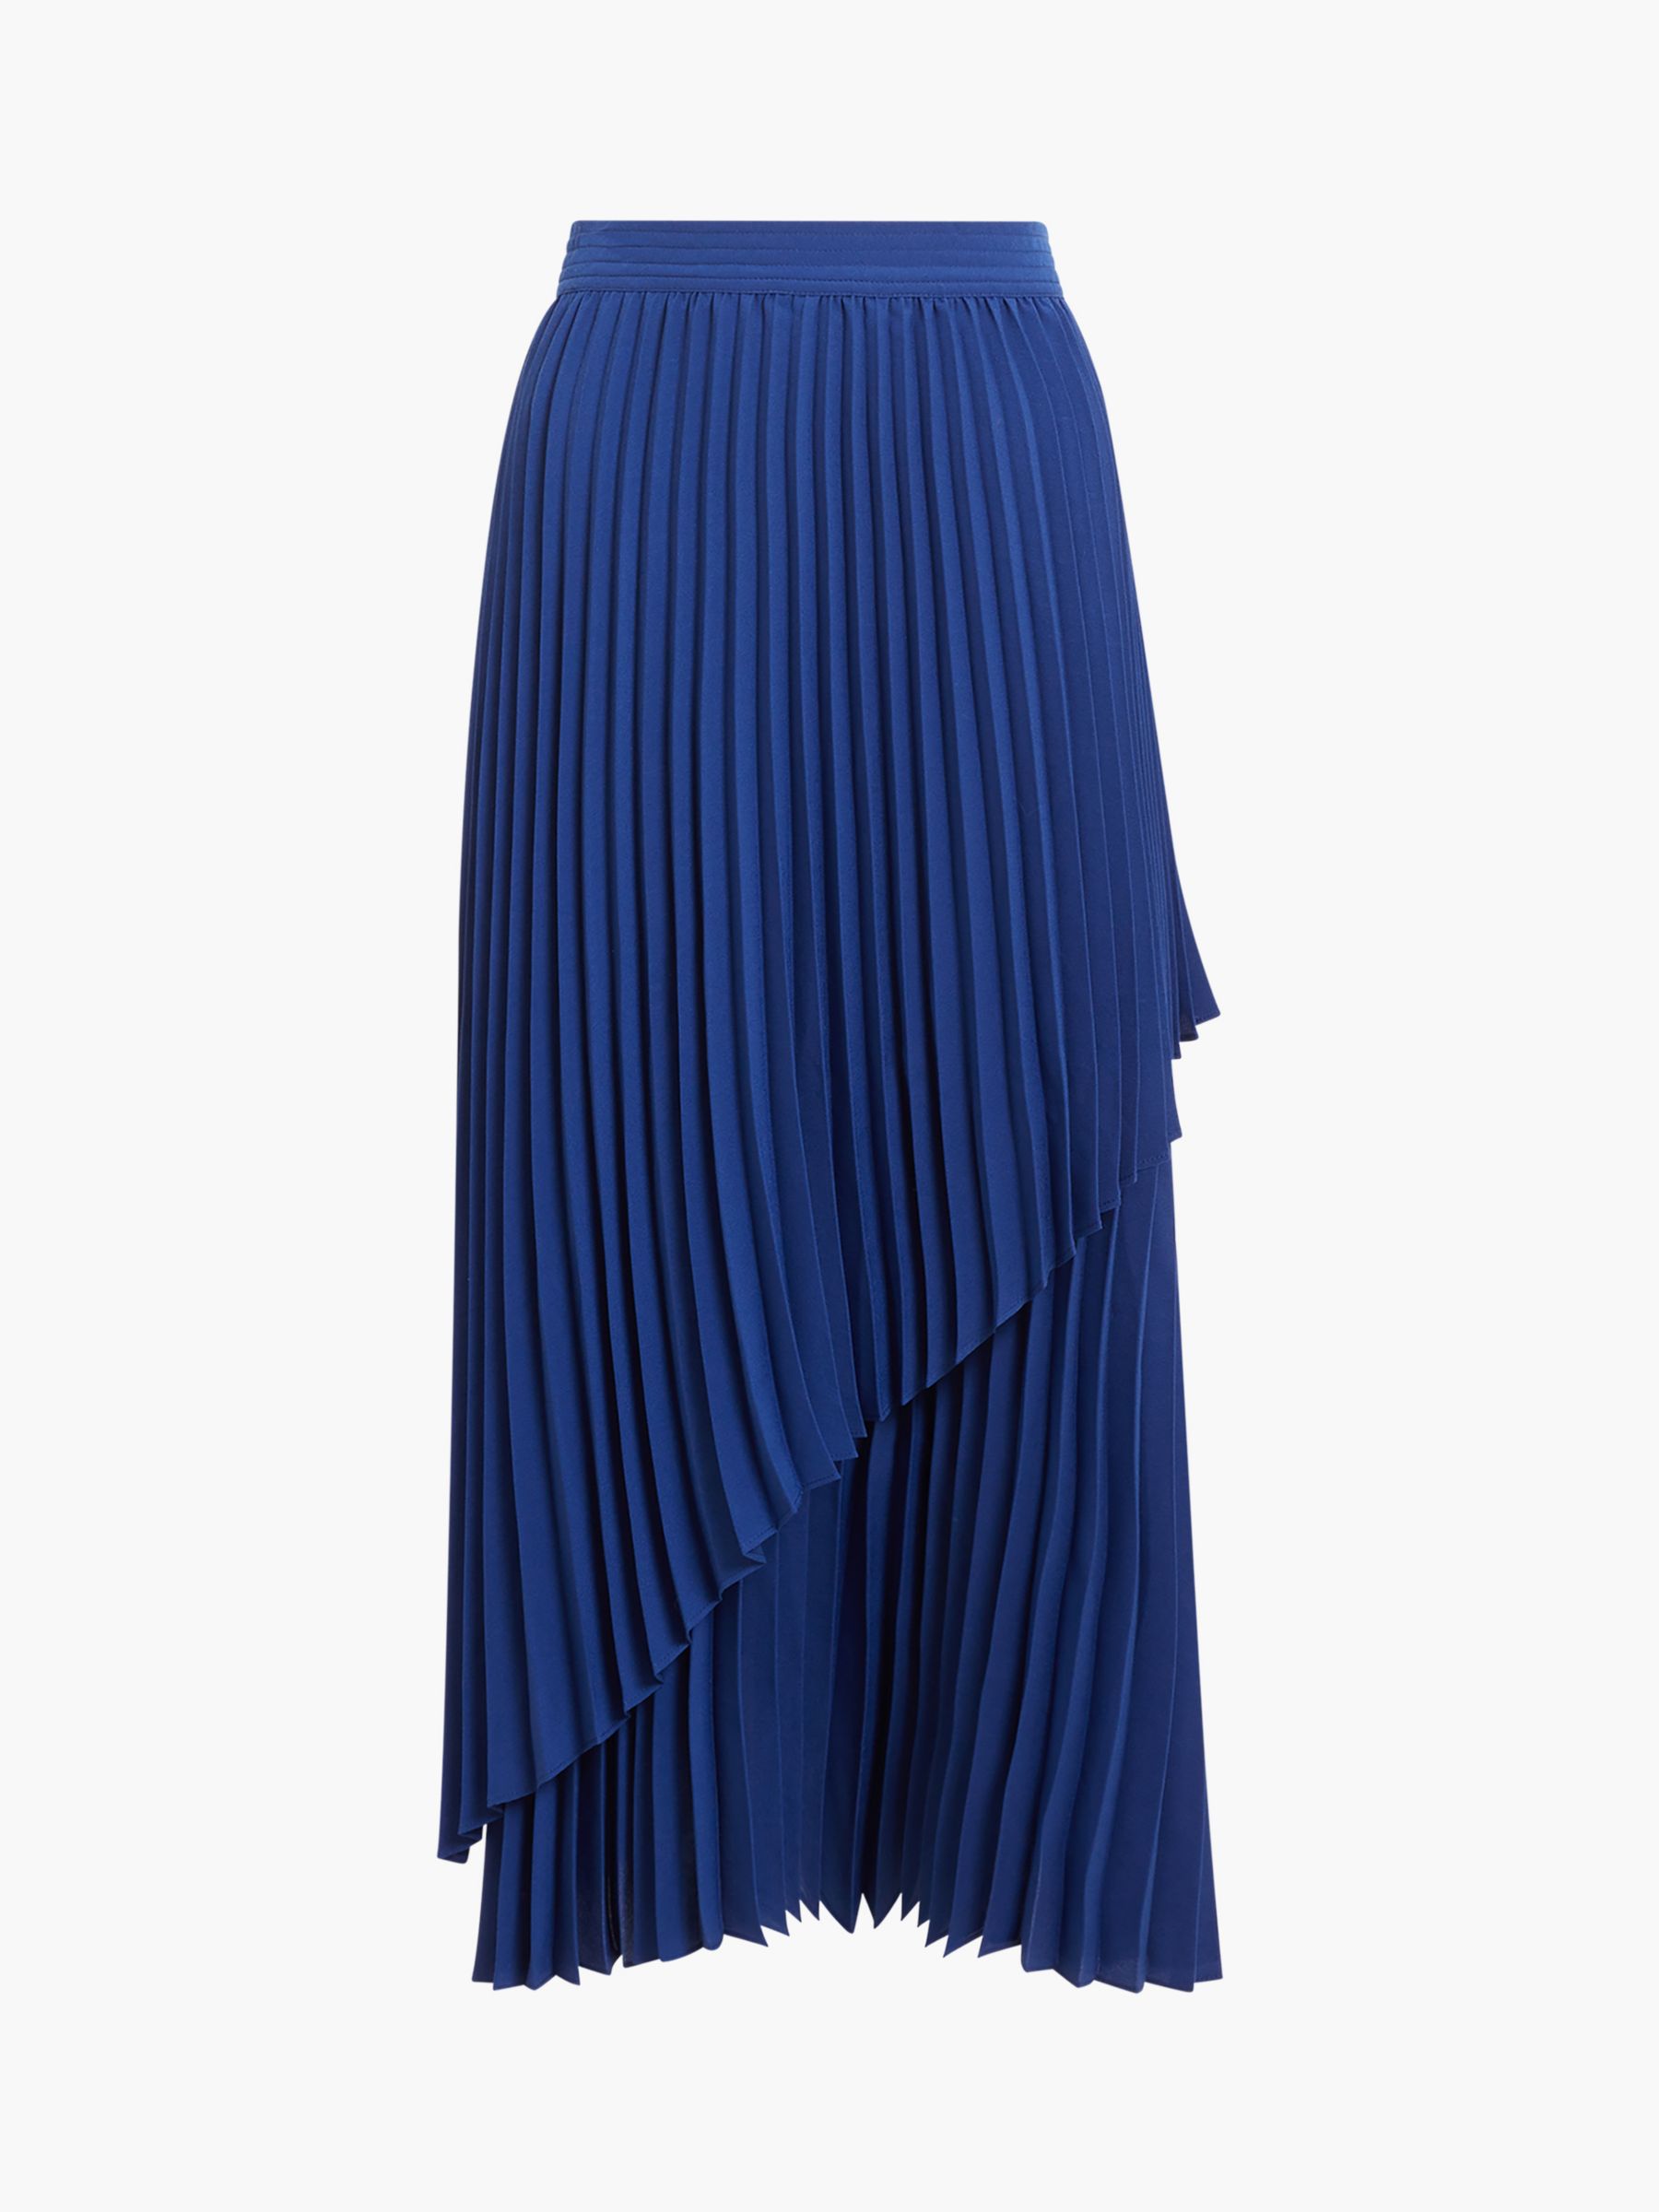 French Connection Arie Pleated Midi Skirt, Blue at John Lewis & Partners